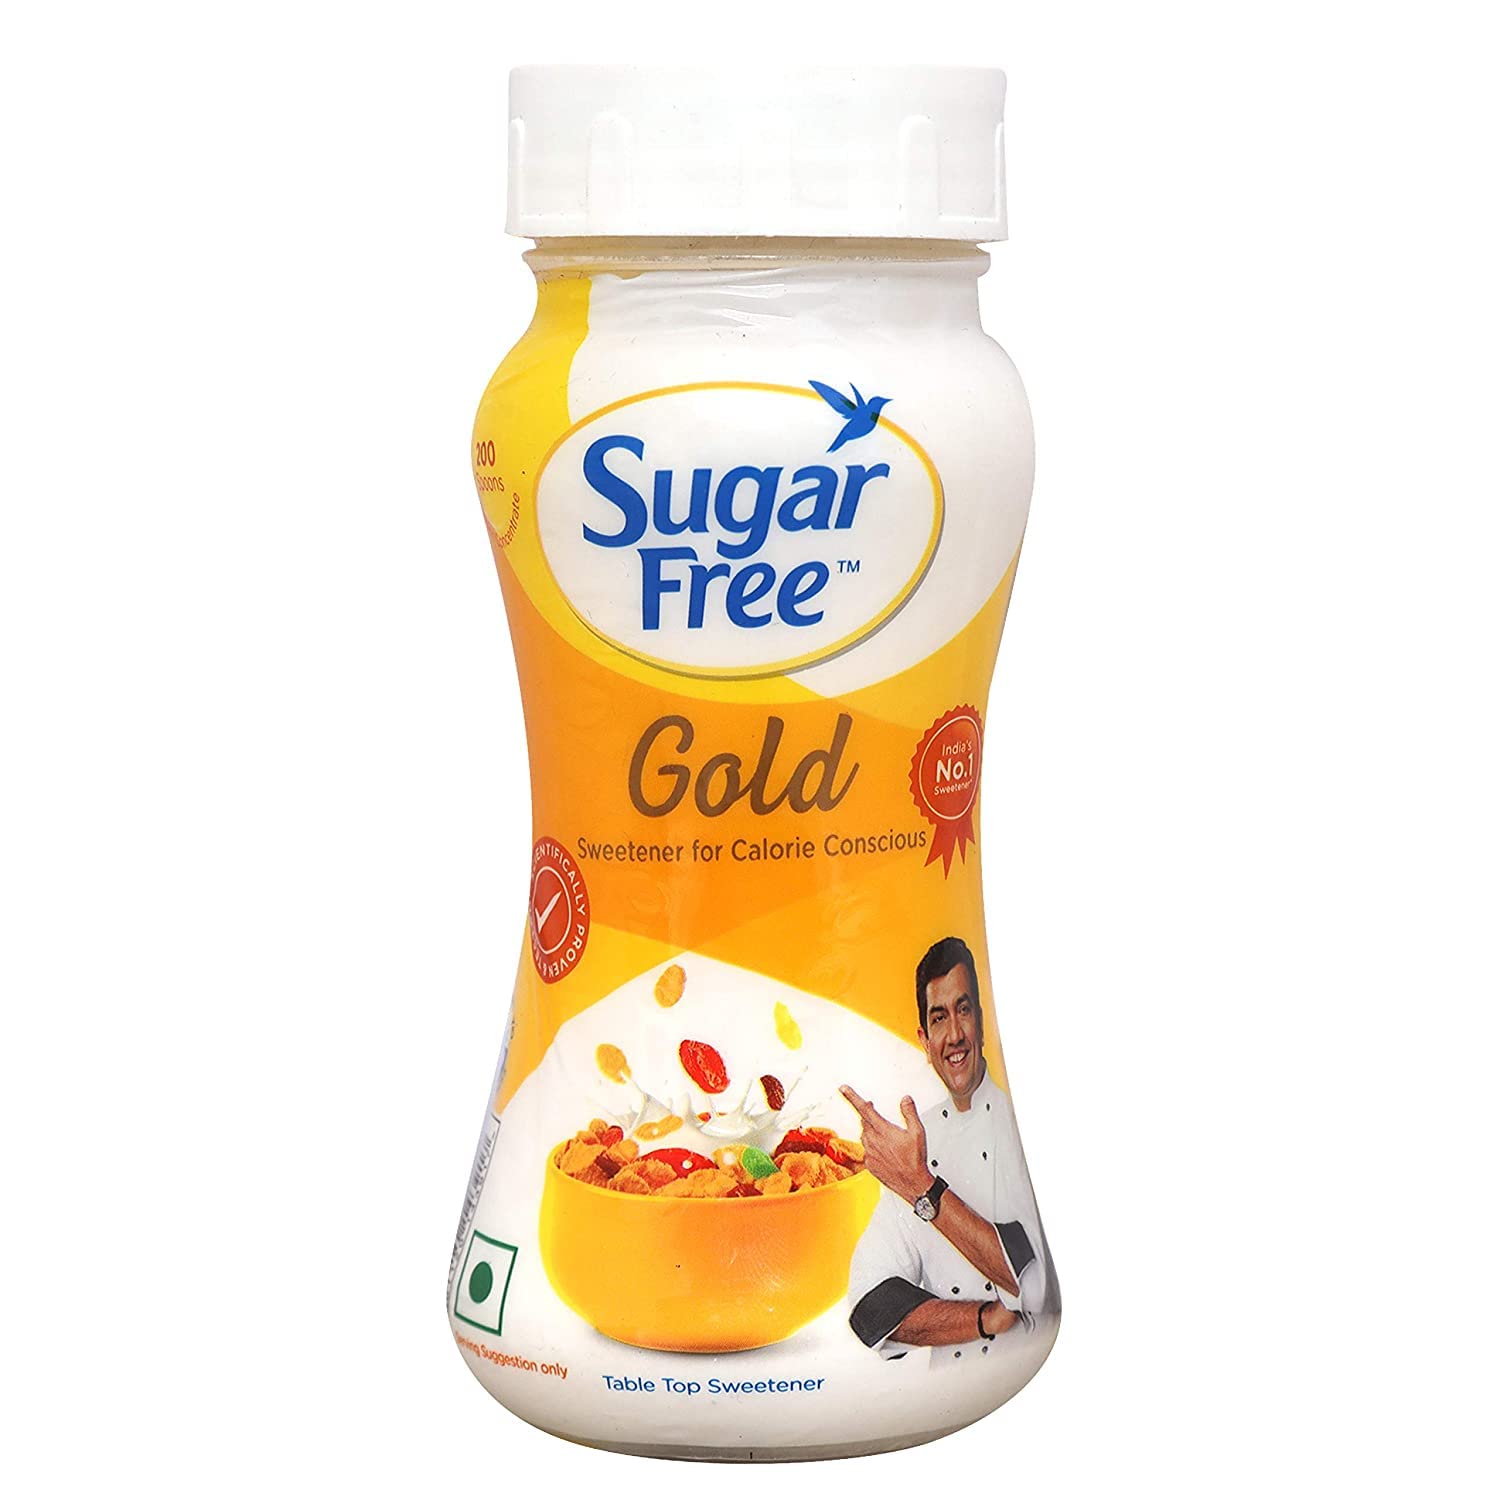  Sugar Free Gold is Equal to Zero Calories Low Calorie Sugar